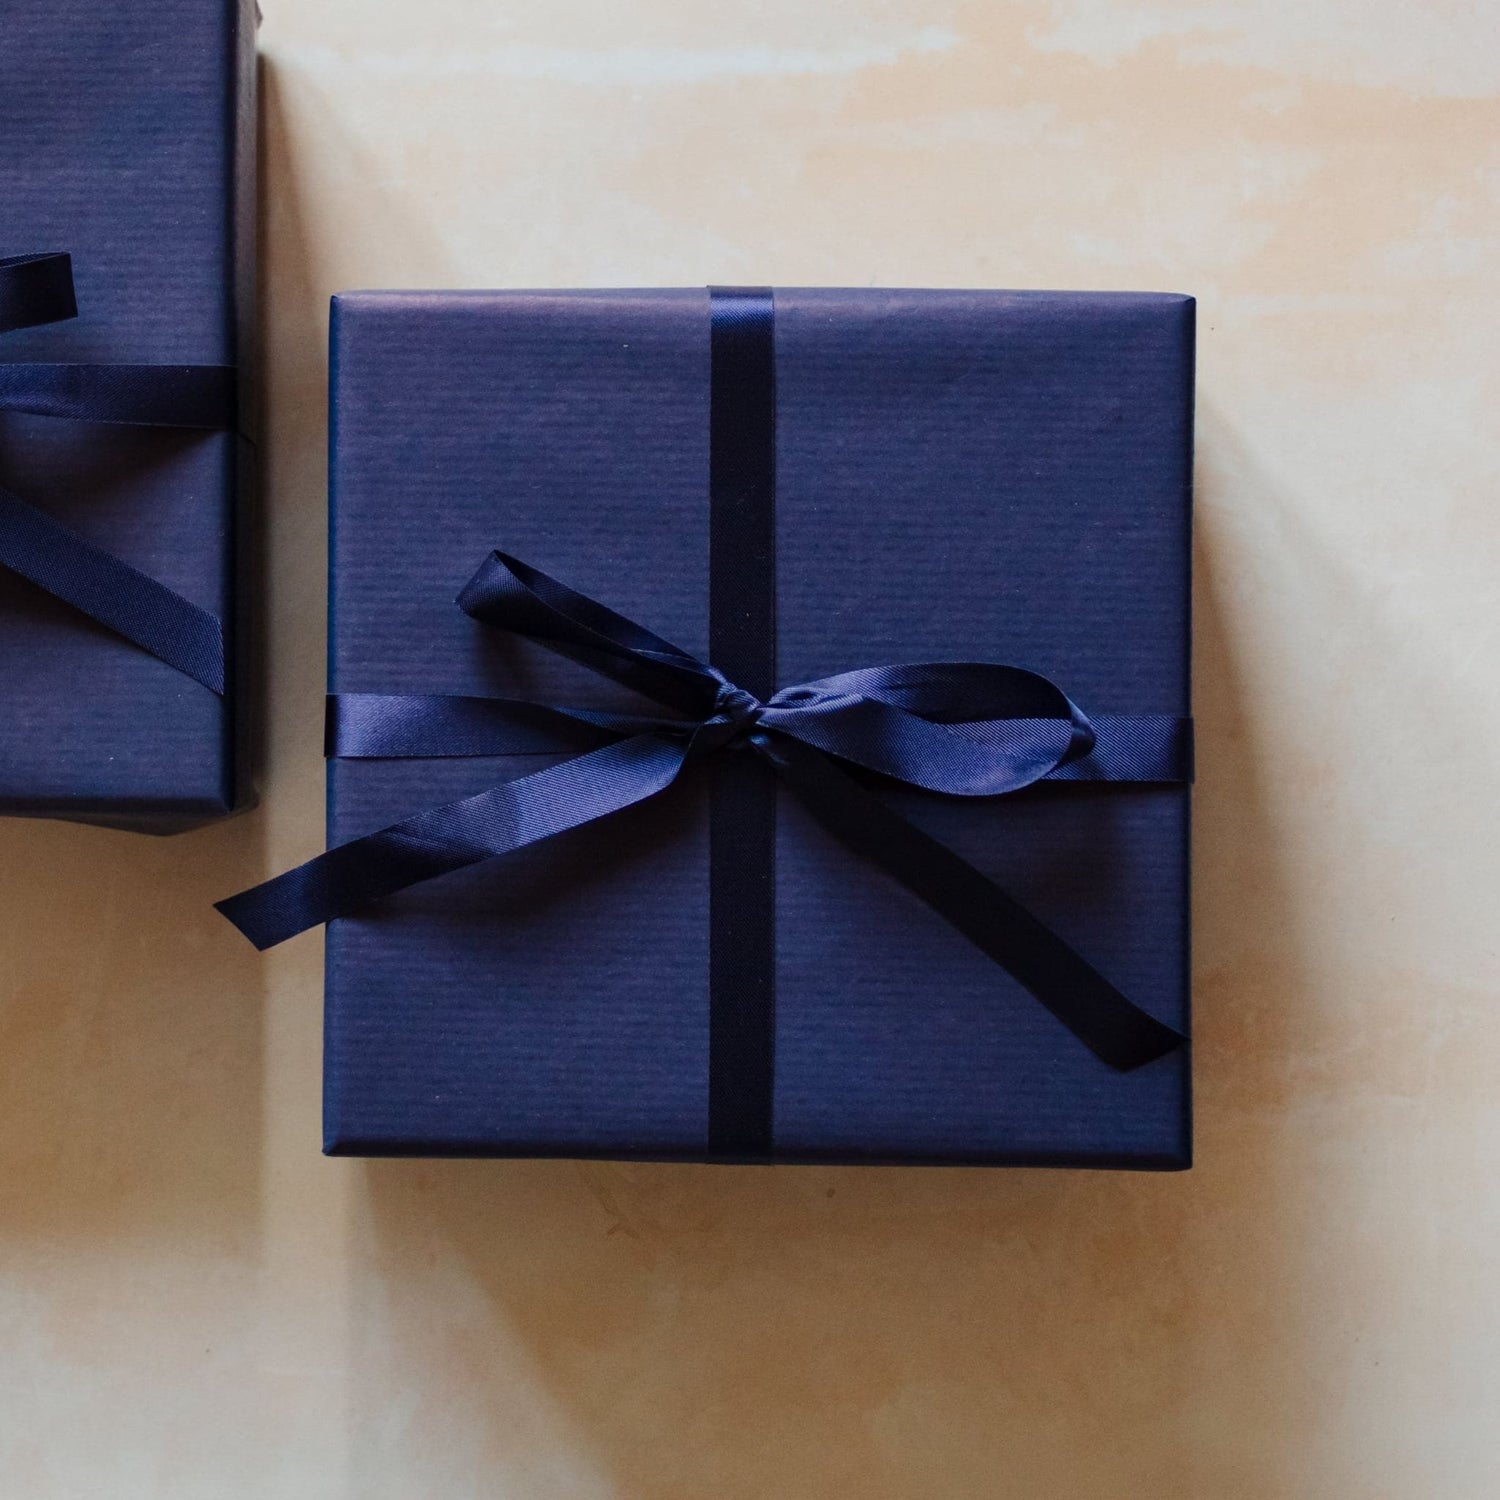 A 400g rose scented large 3 wick soy candle from the Home County Co. is shown with luxury Gift Wrap. The 3 wick candle is wrapped in luxury navy wrapping paper secured with navy ribbon.